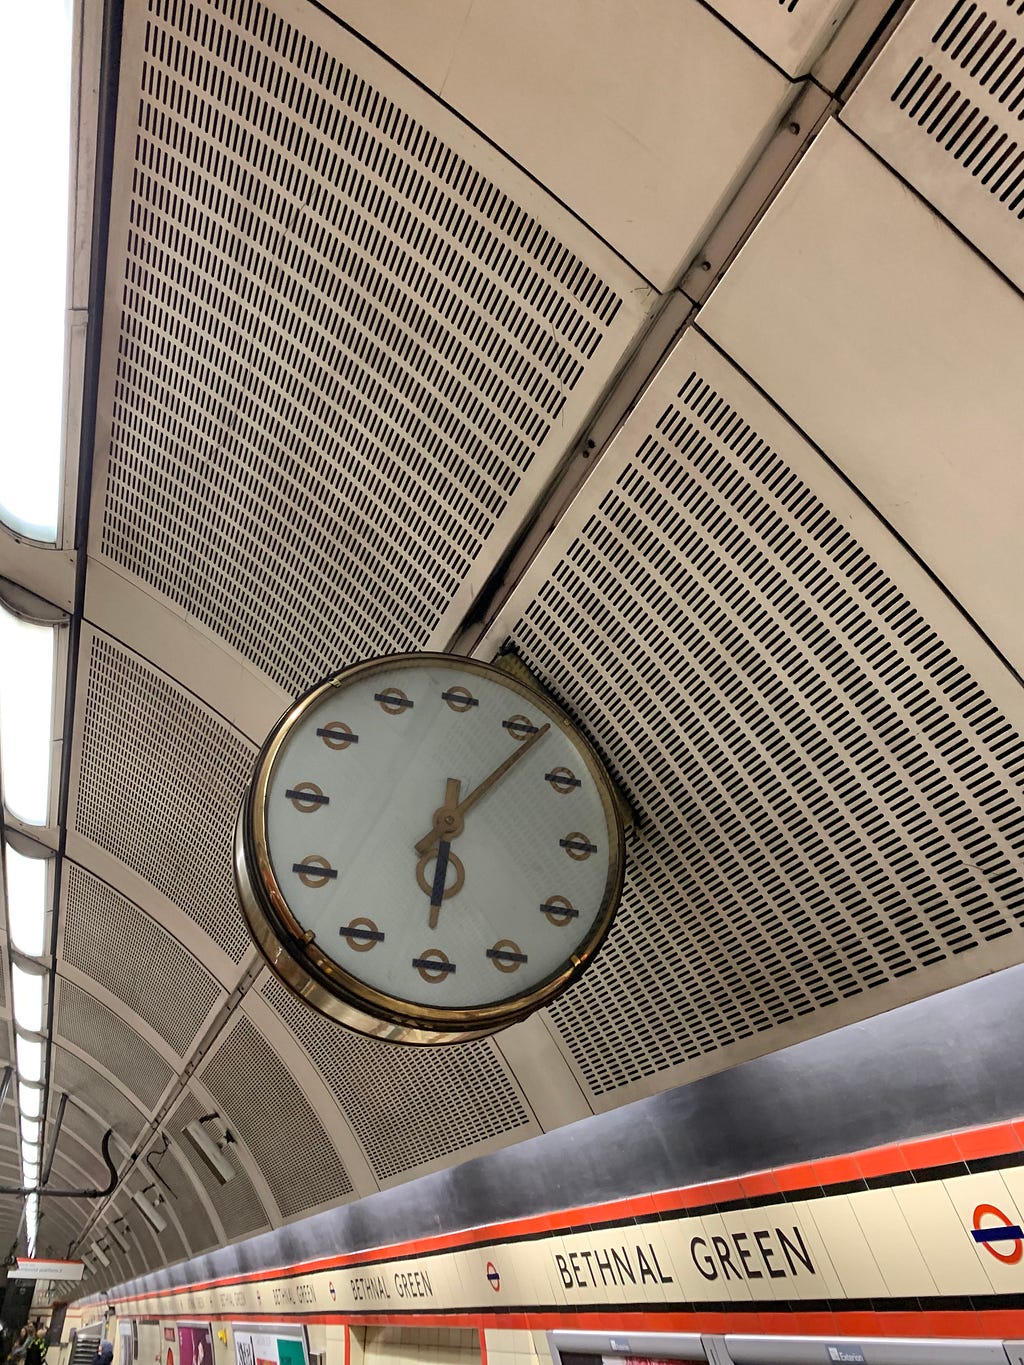 A clock on the underground. Each hour marker is a small London Underground logo.